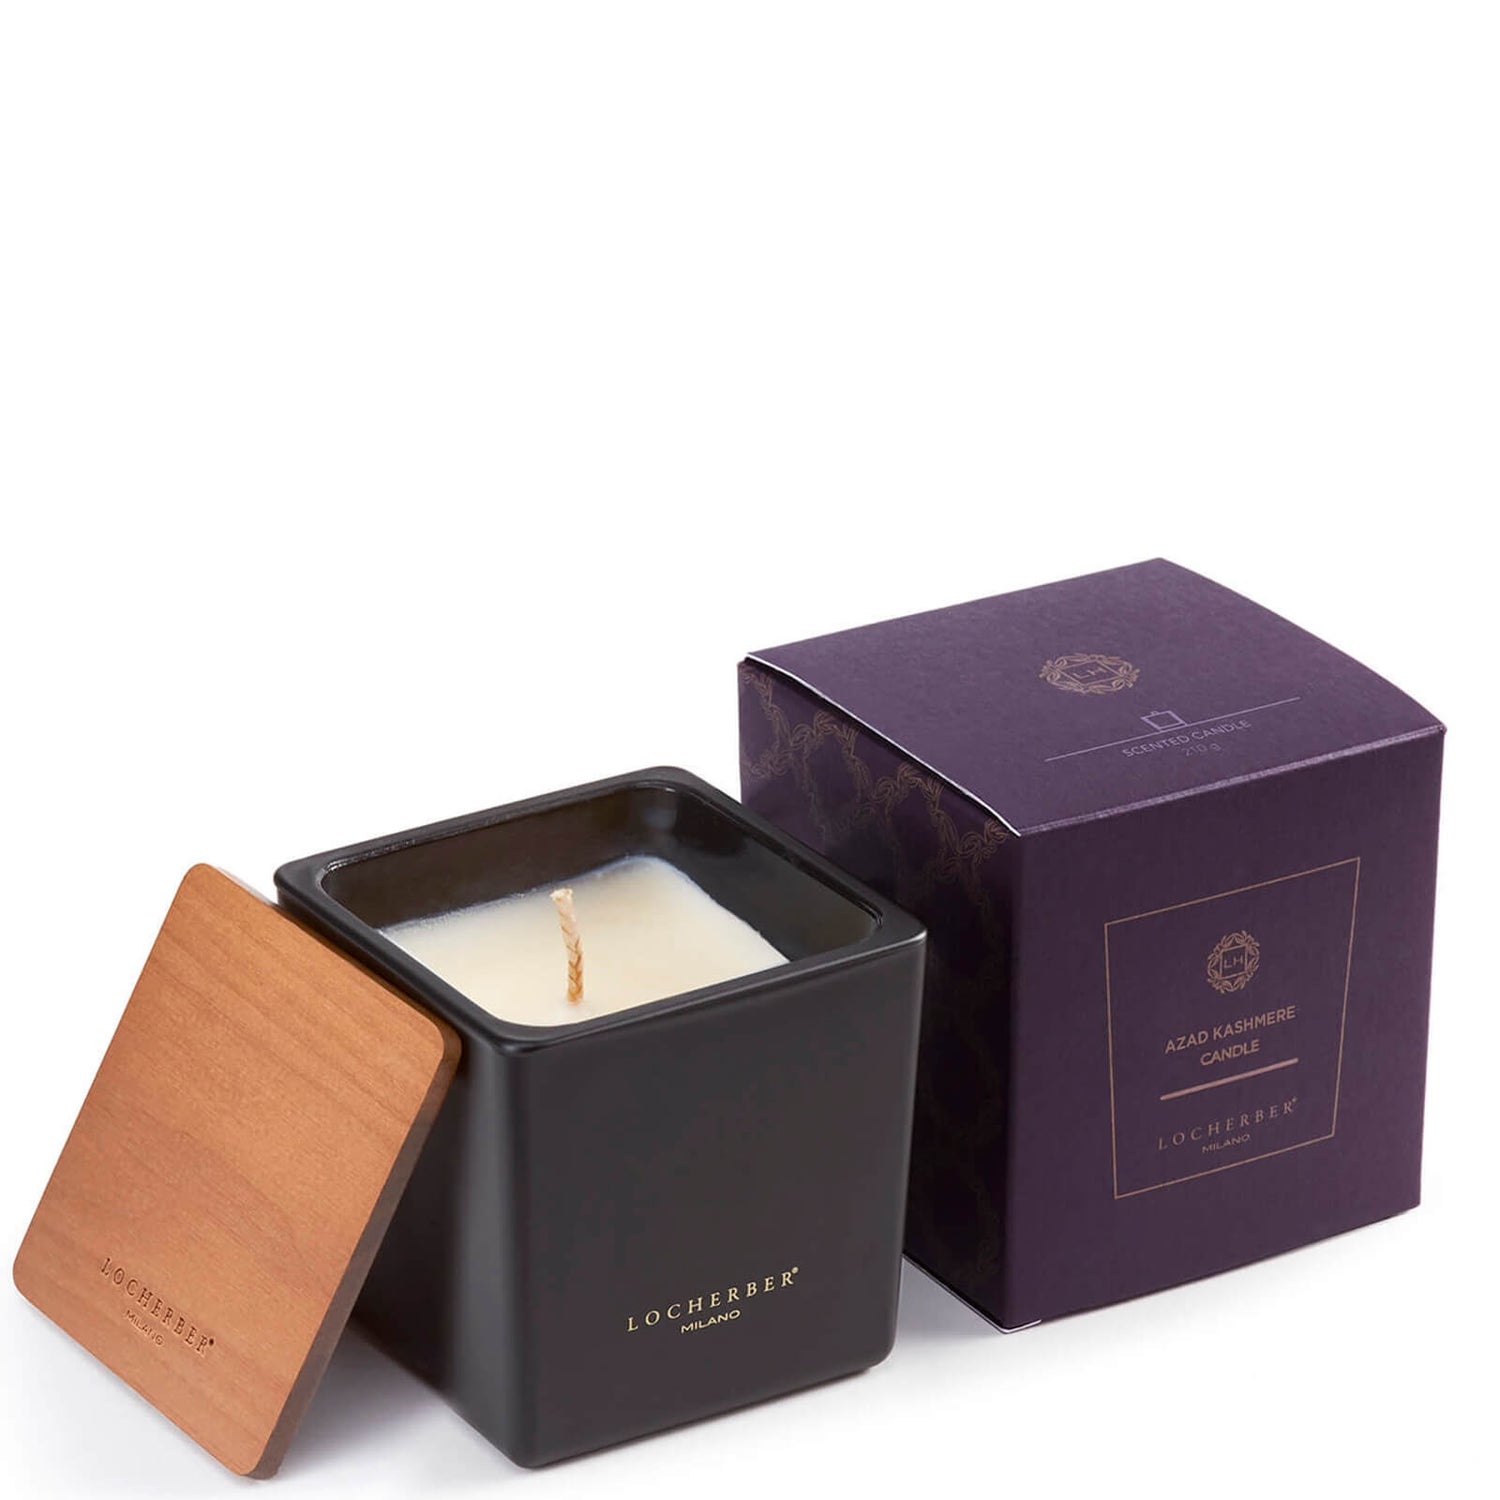 Locherber Azad Kashmere Scented Candle - 210g